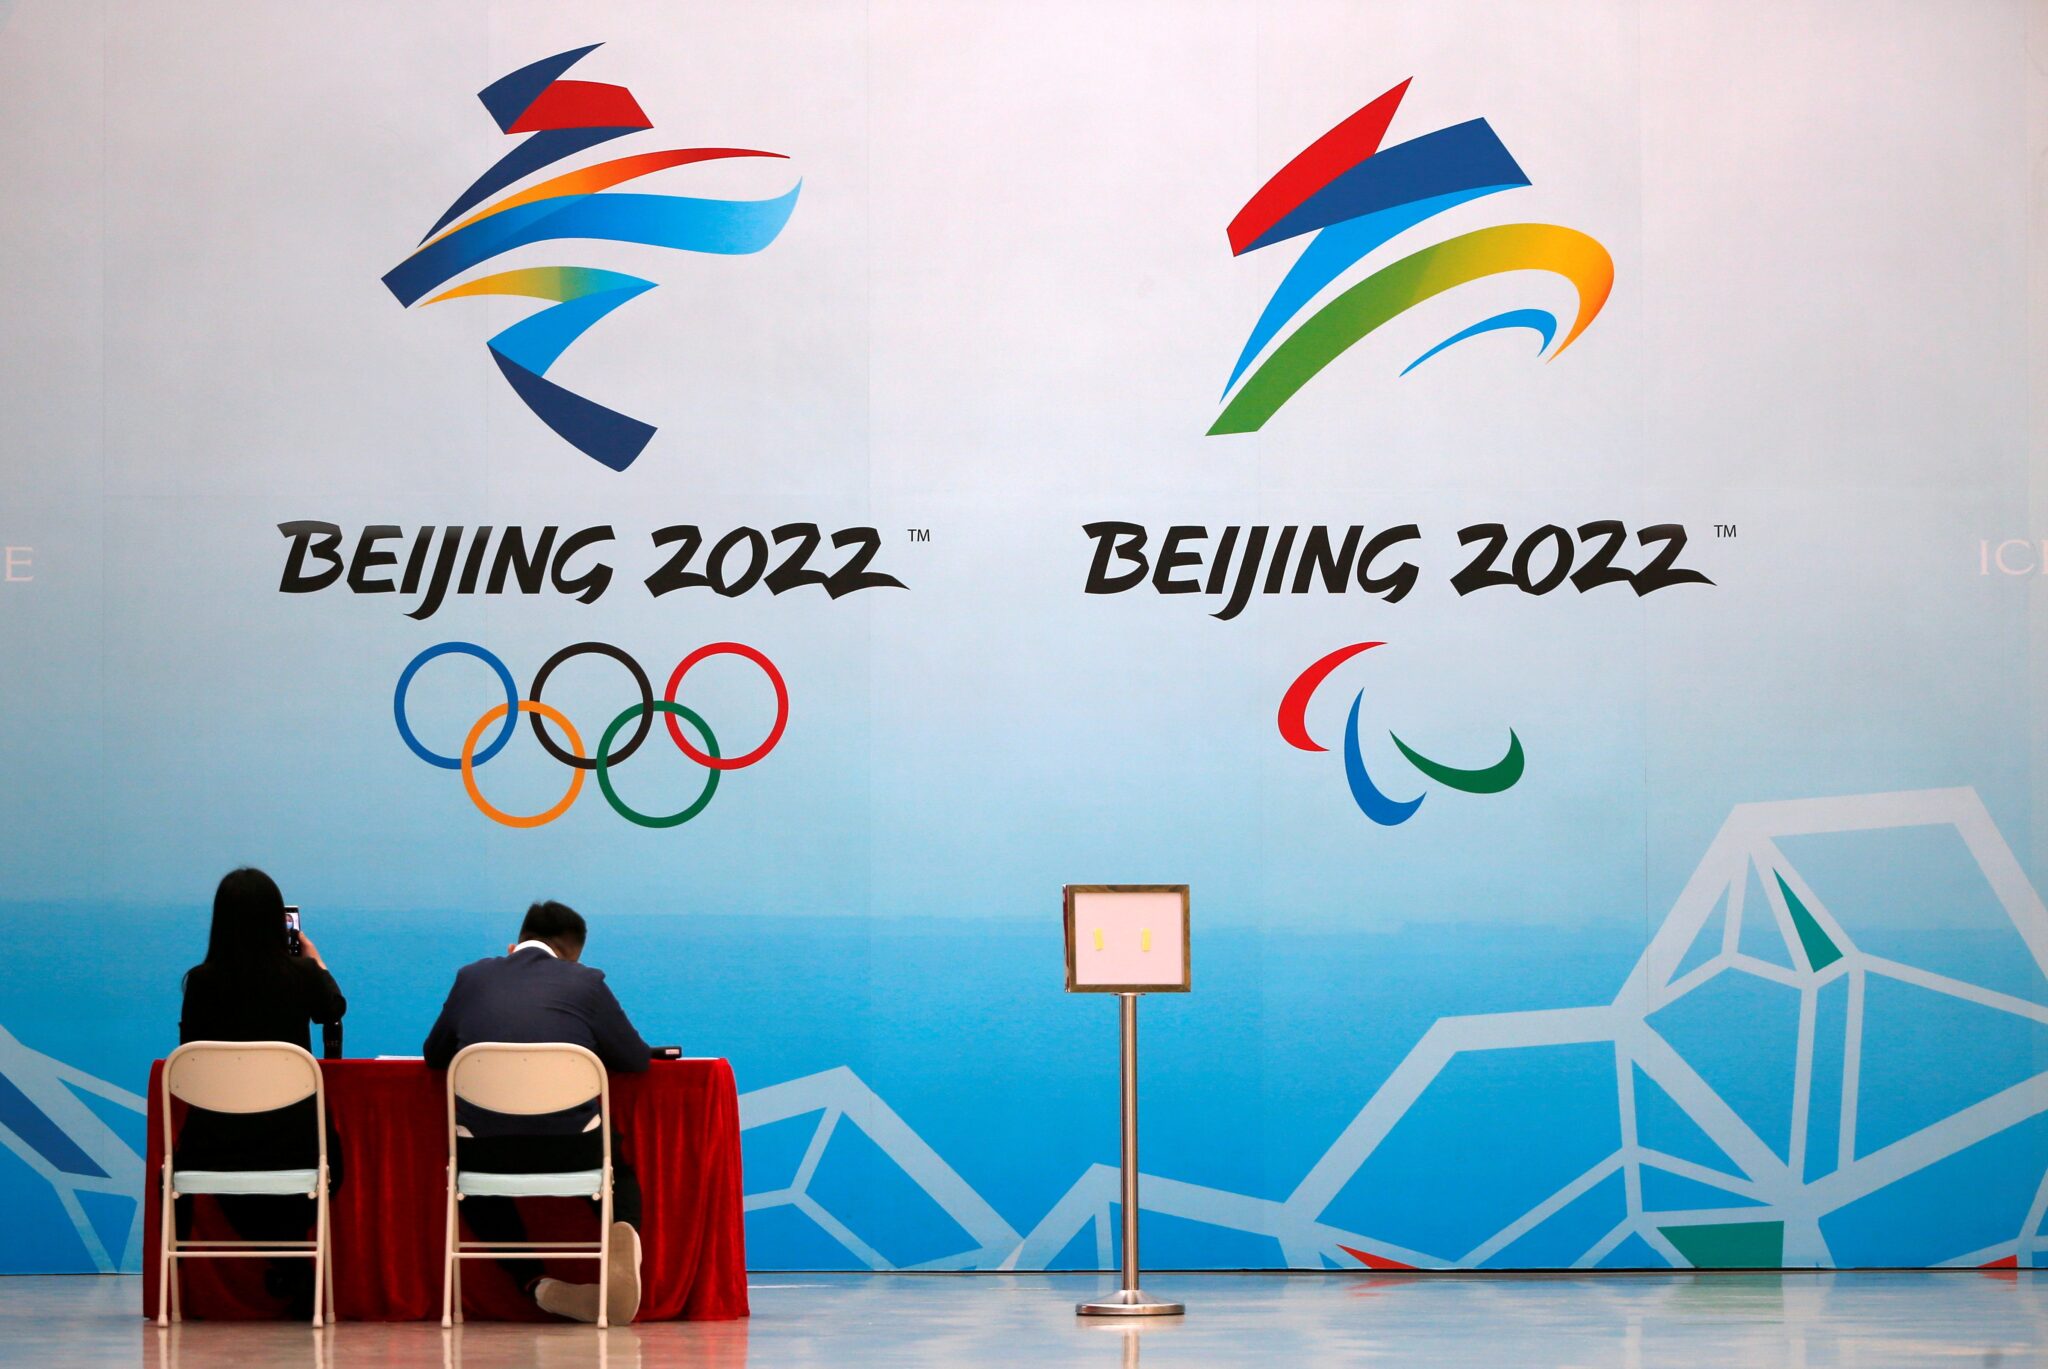 Boycott of 2022 Winter Olympics in Beijing considered as congressional